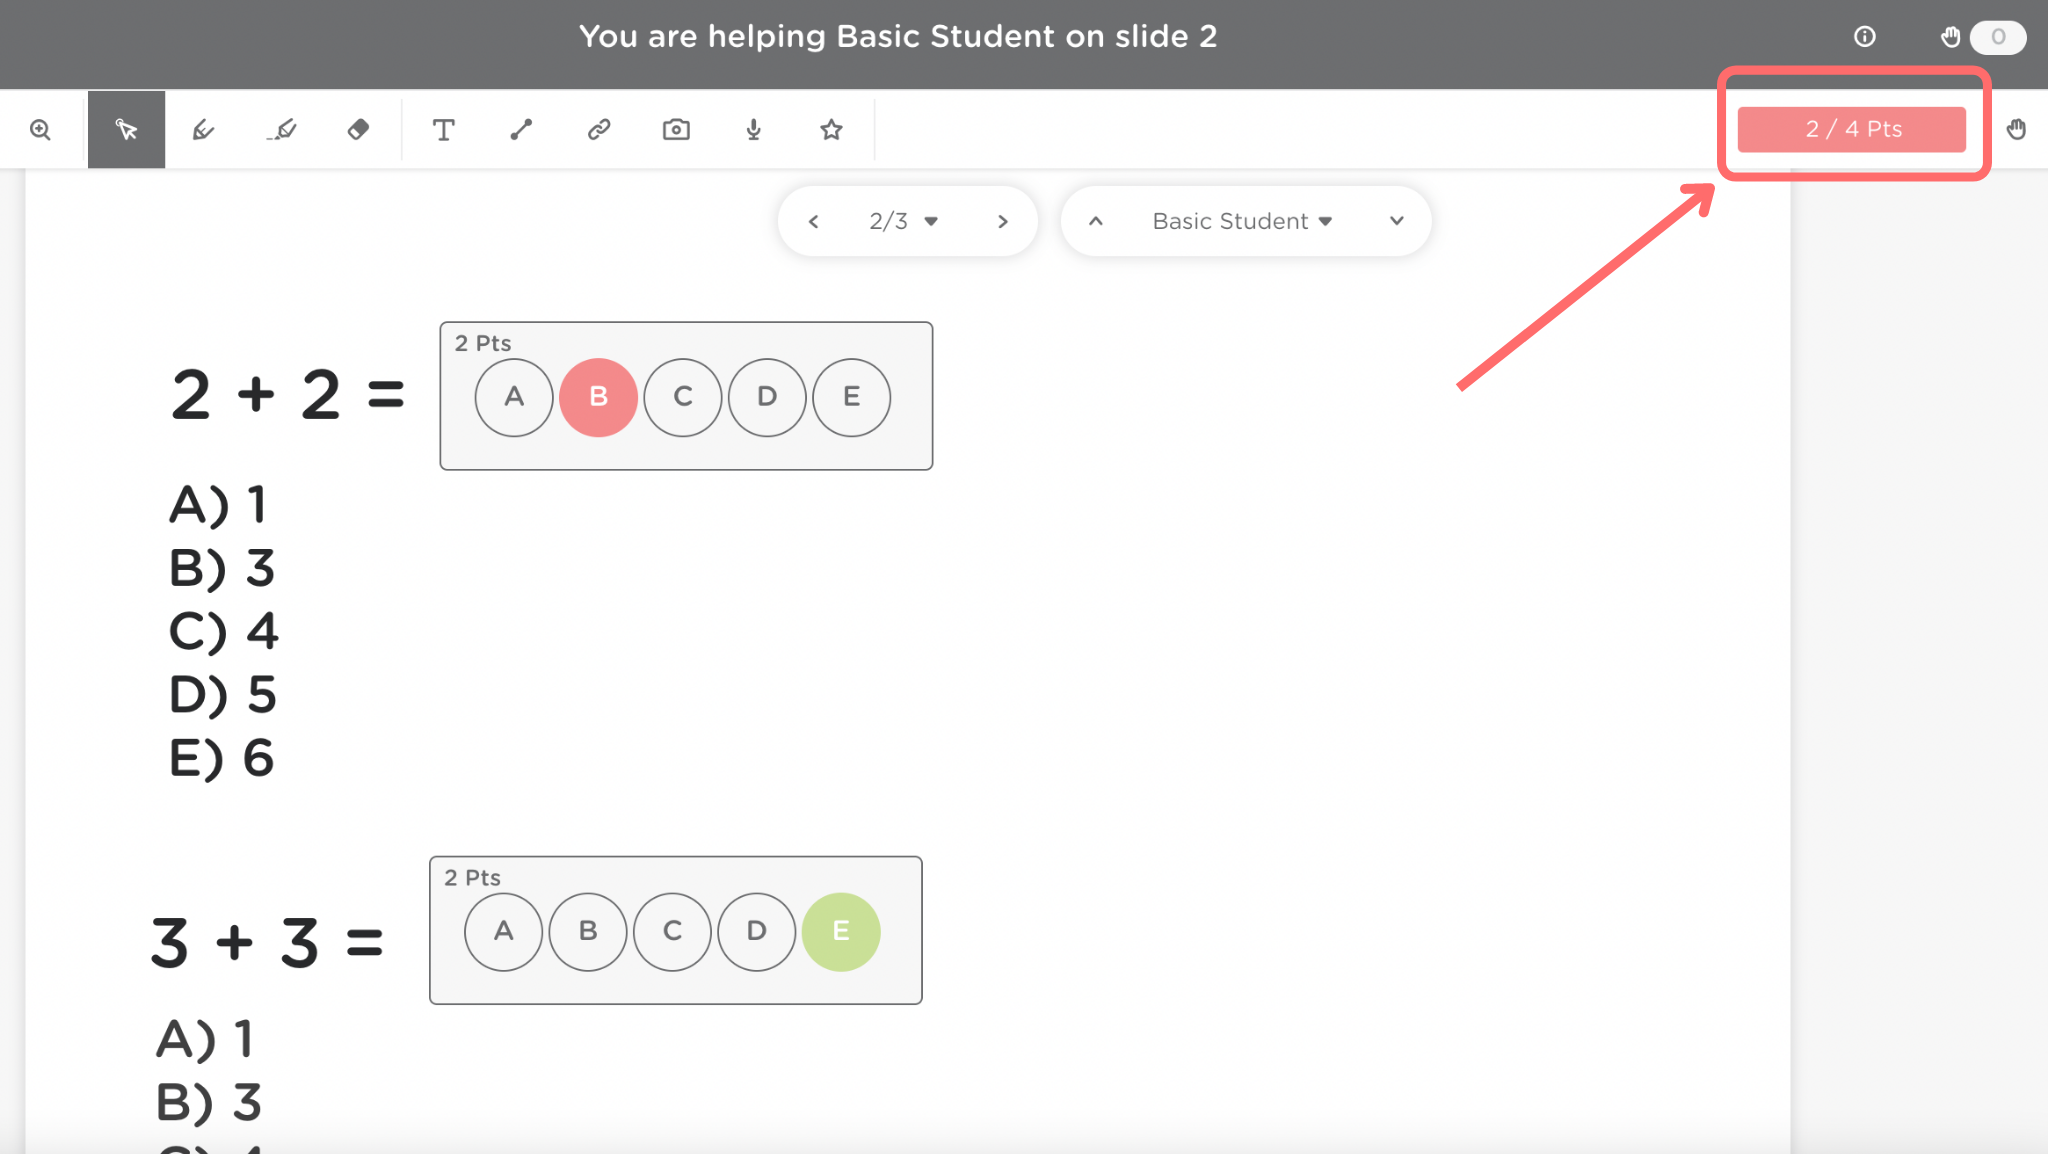 The teacher’s view of a student’s slide. Two multiple choice questions are on the slide. One is answered incorrectly and one is answered correctly. A red arrow points to the student’s total points (outlined in red) in the upper right hand side.